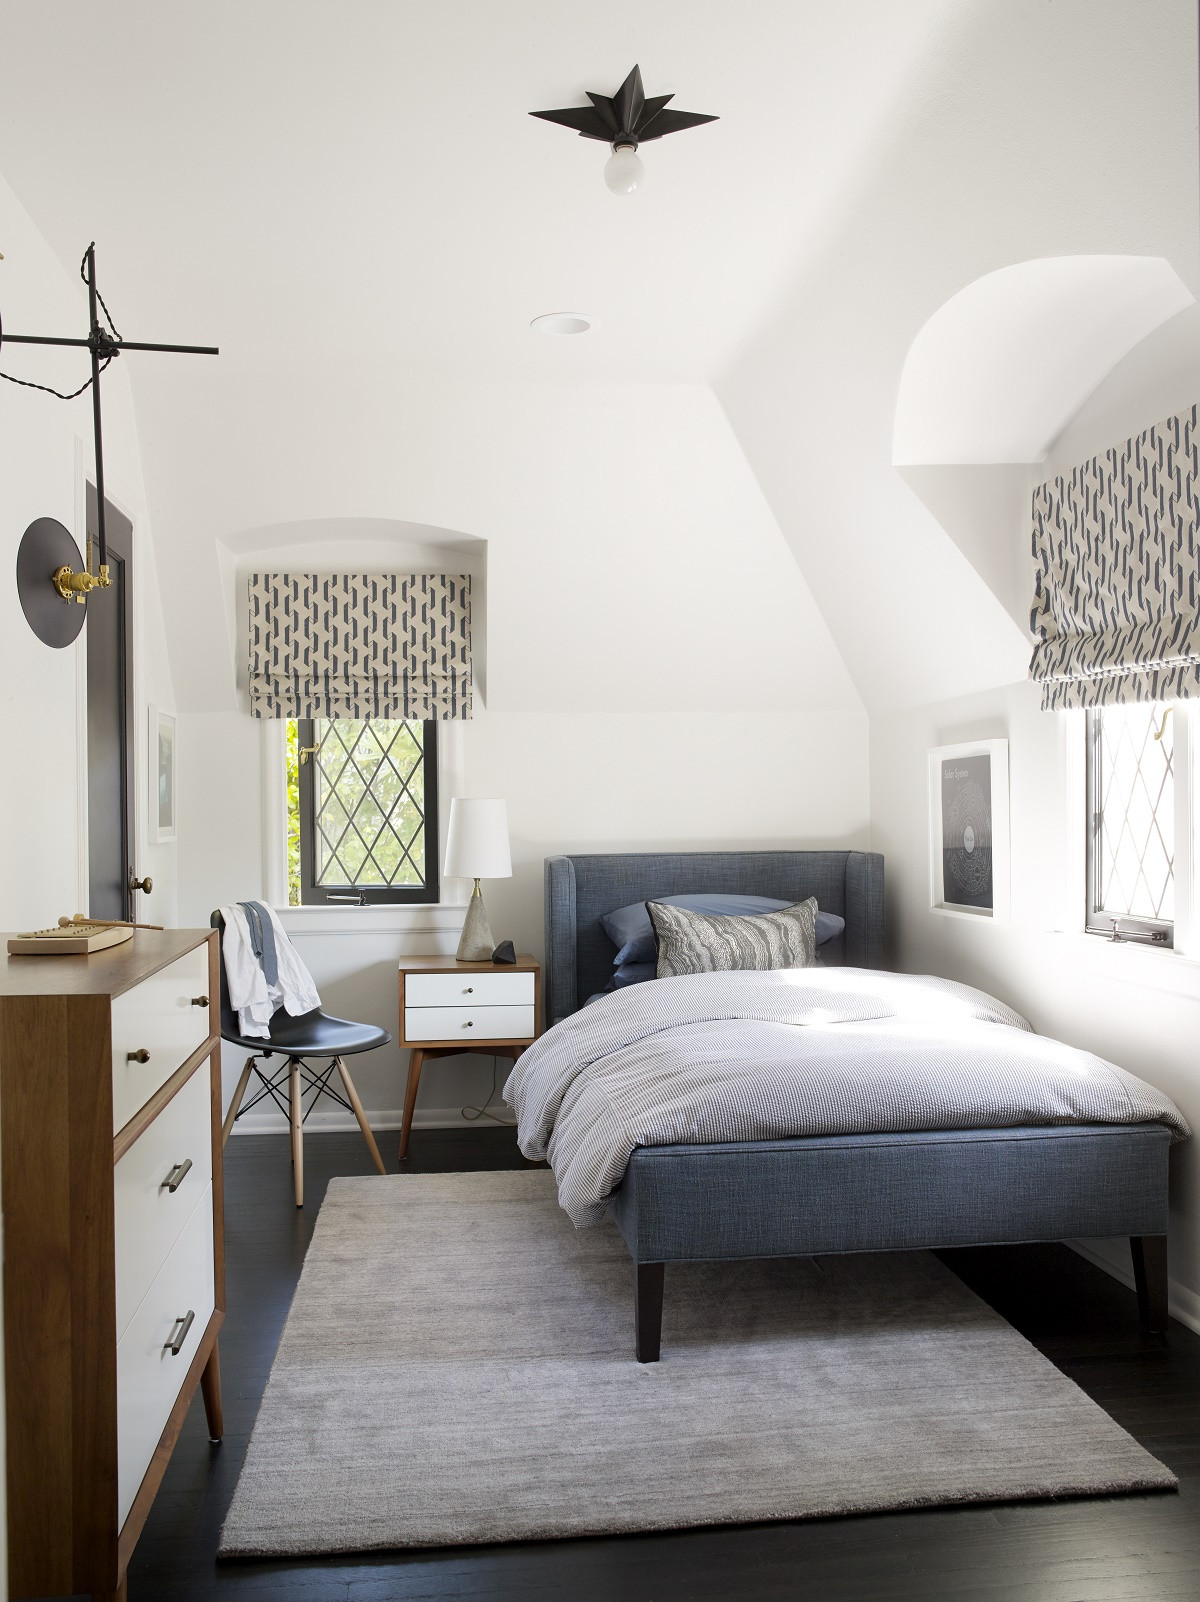 Bedroom Ideas Kids
 Steal This Look His and Hers Mid Century Inspired Kids